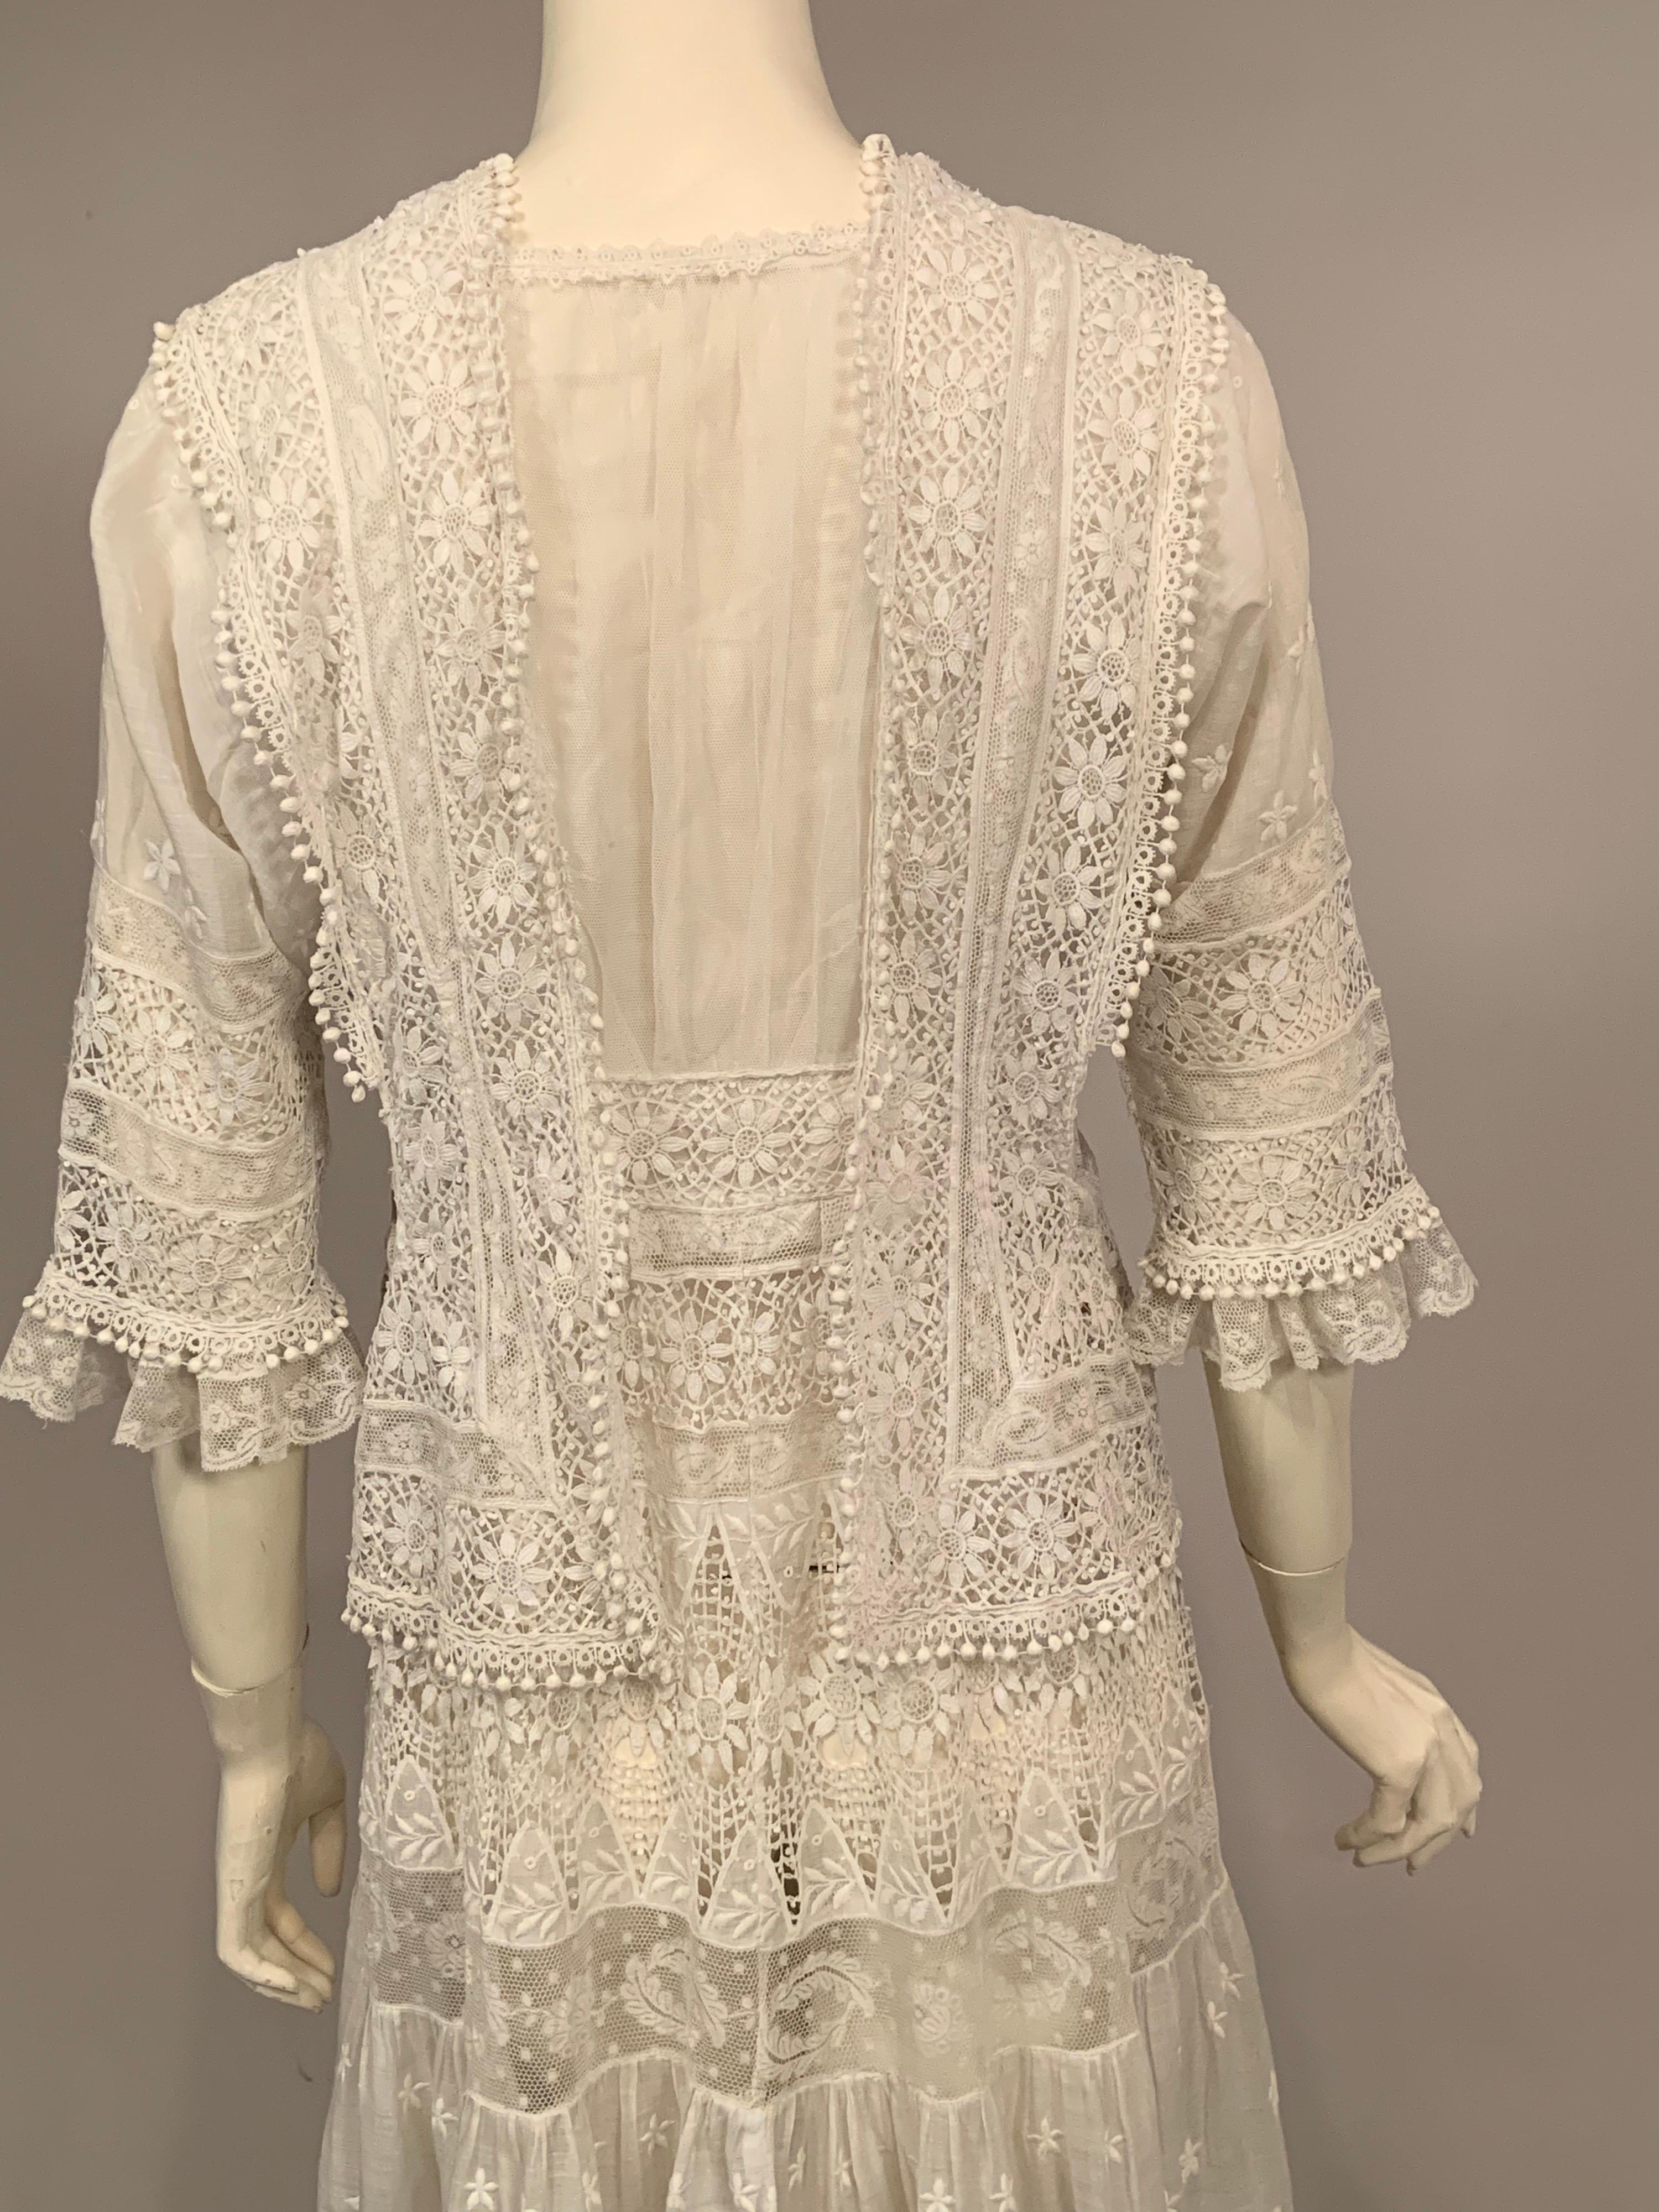 Vintage Edwardian Embroidered Linen and Lace White Dress For Sale 2